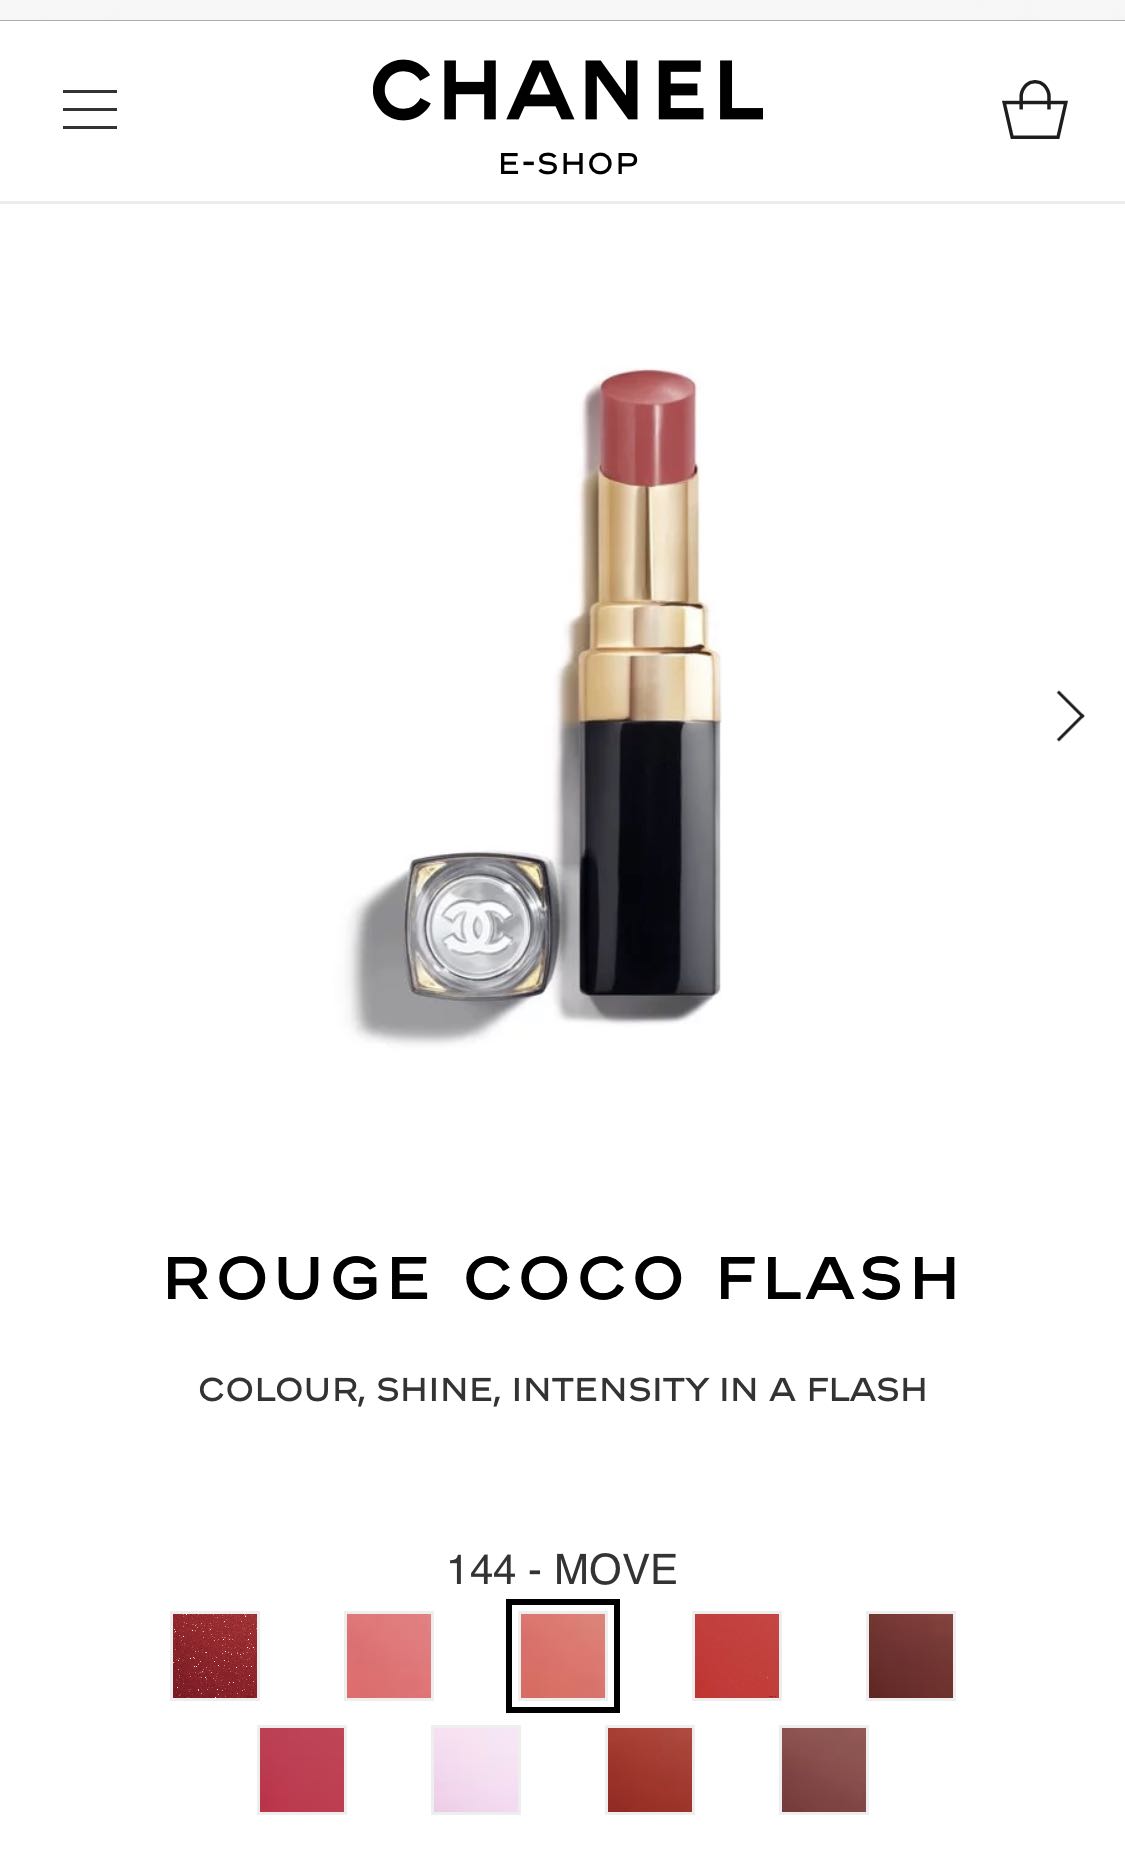 Chanel Rouge Coco Flash 144 Move